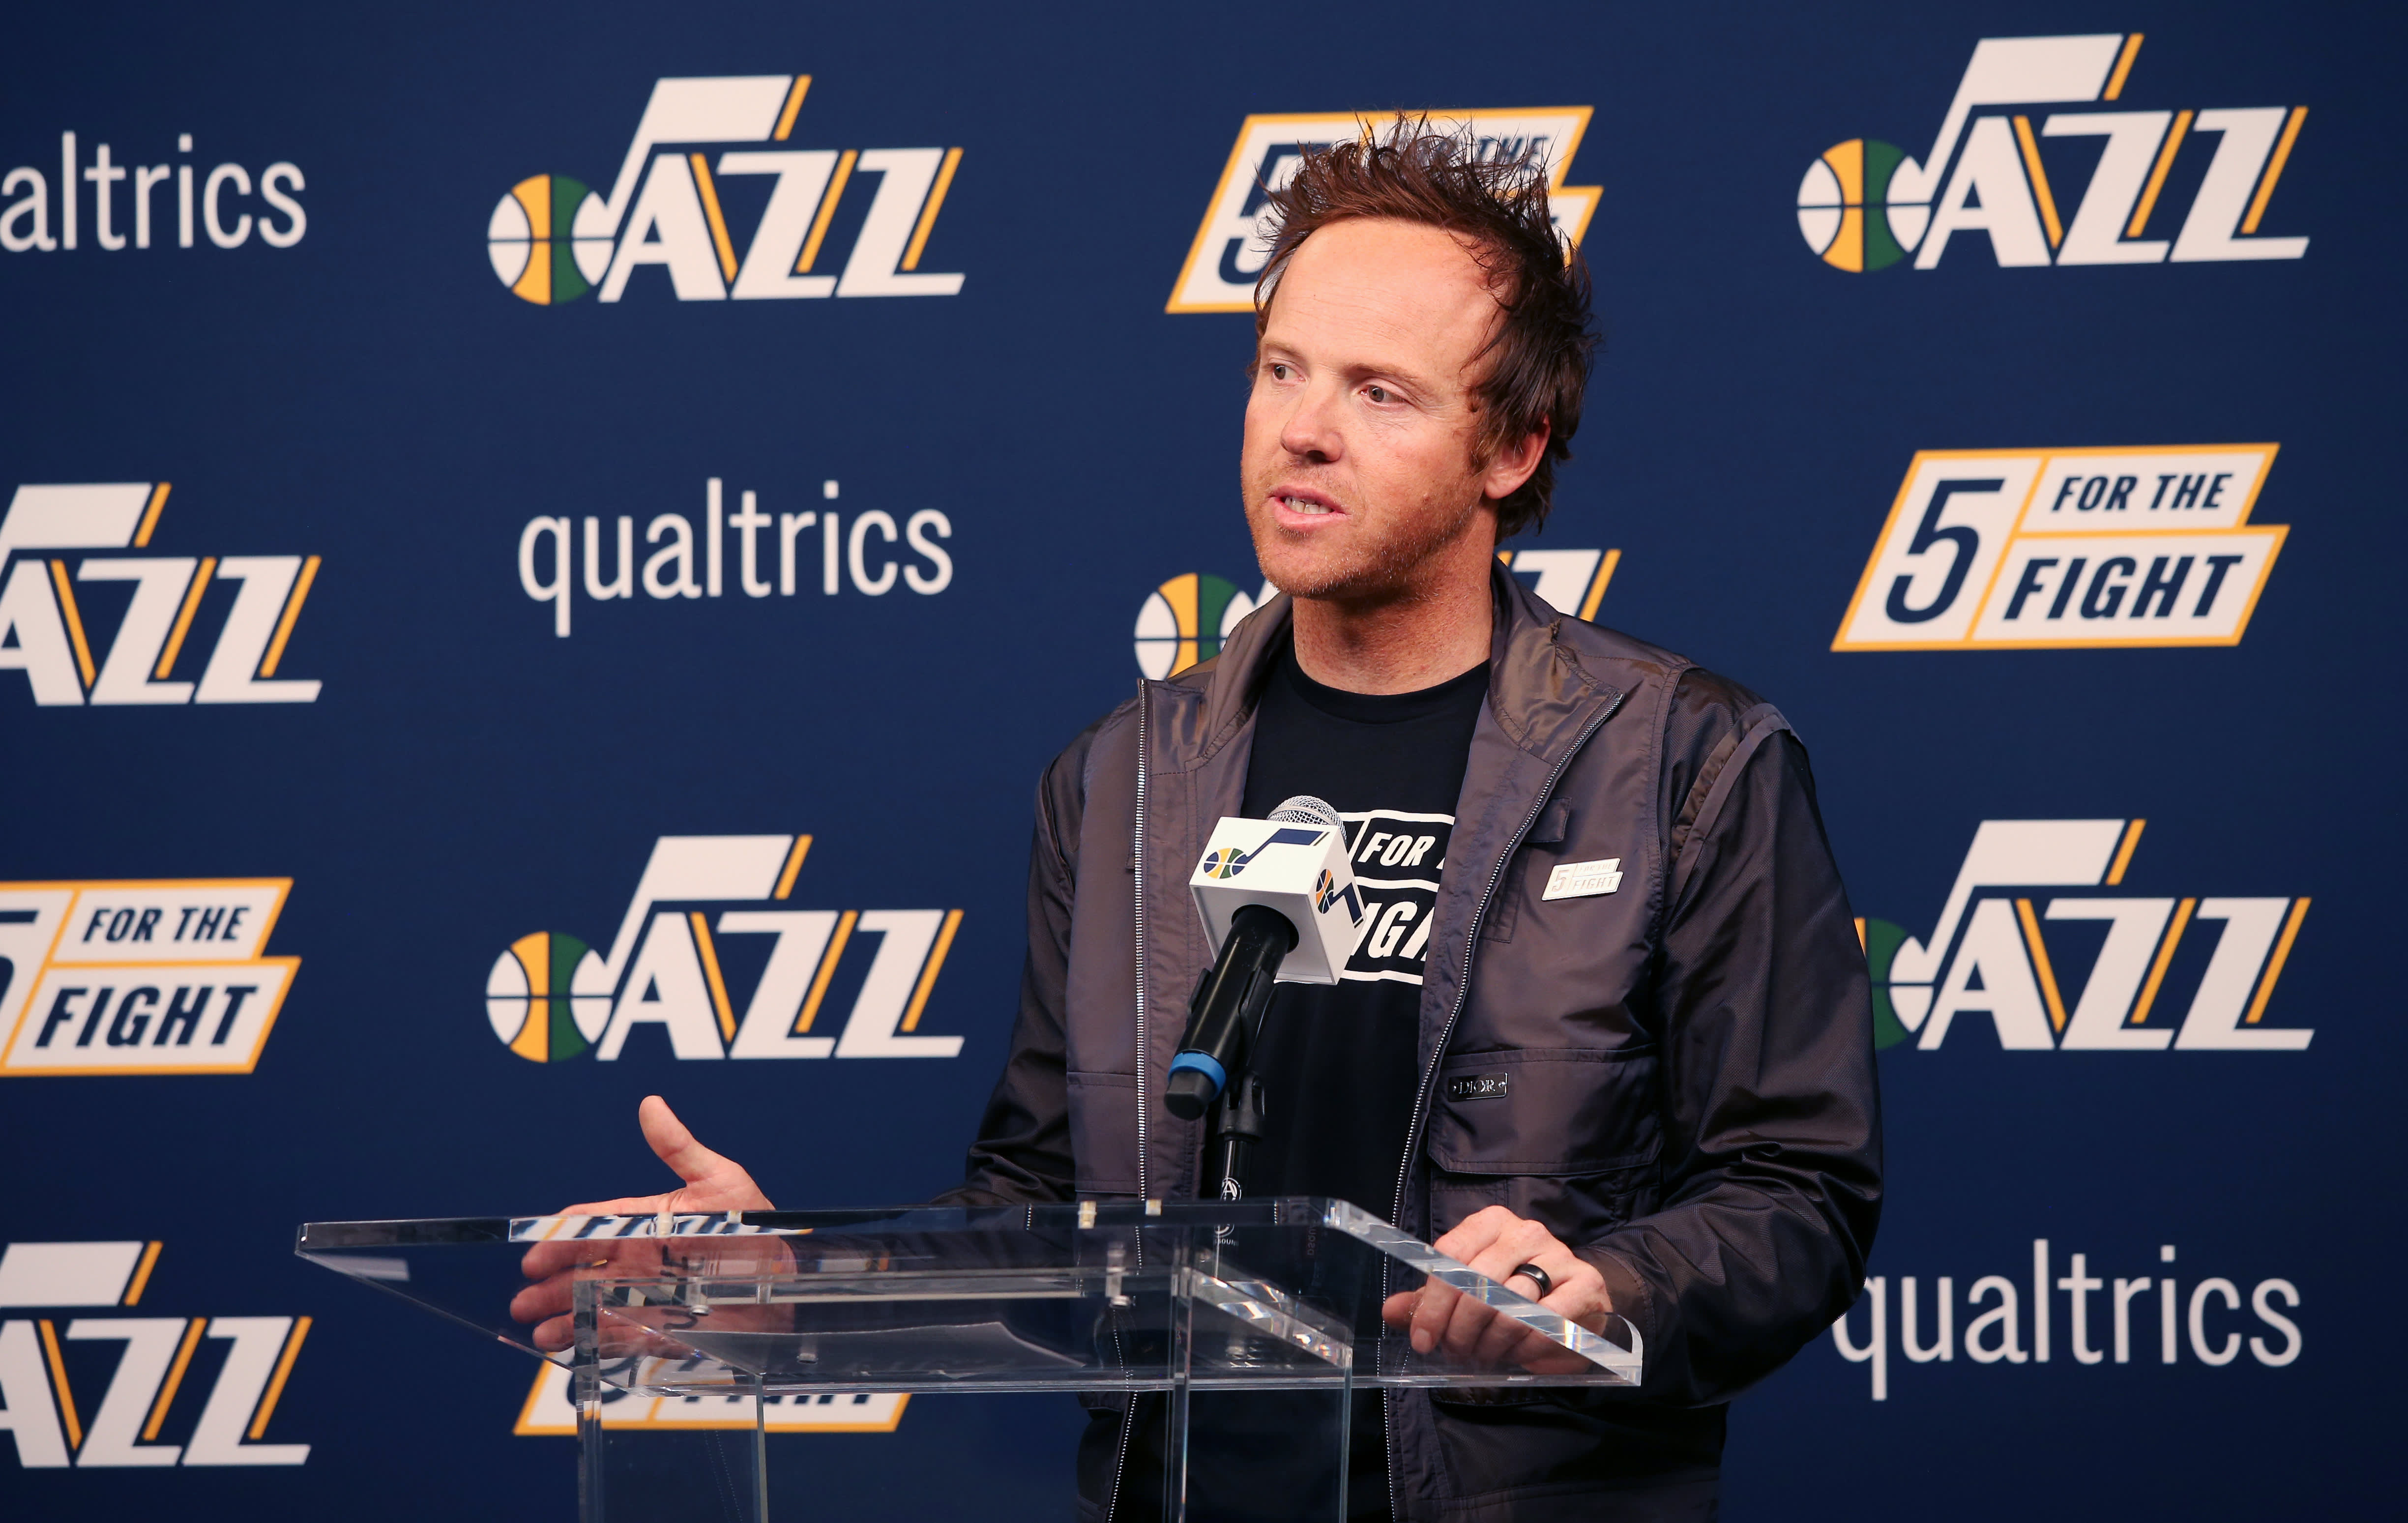 Utah Jazz owner Ryan Smith leads Qualtrics’ IPO as the team moves first